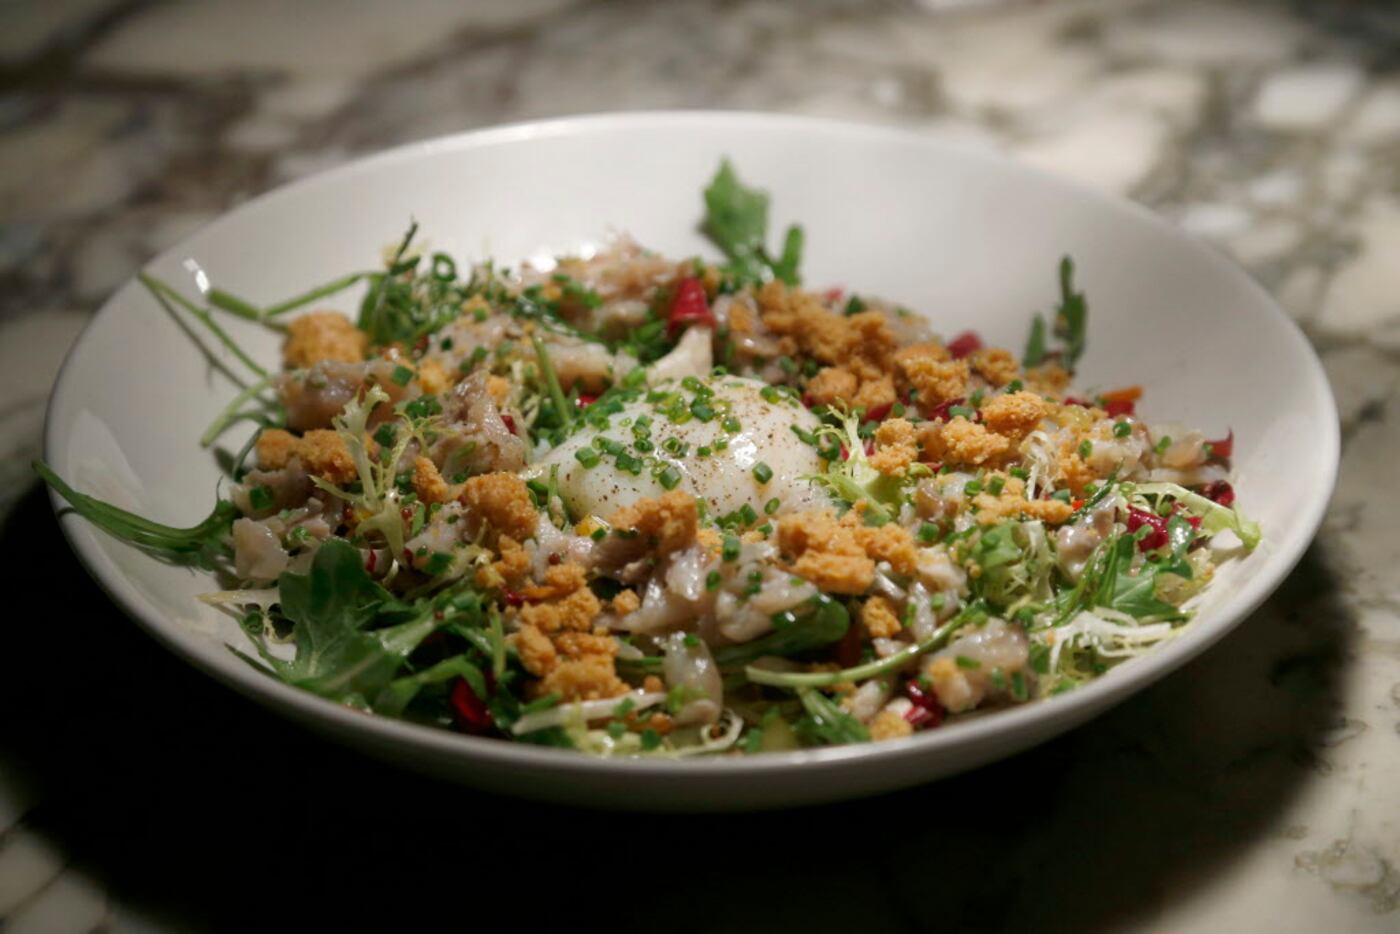 Chef Richard Blankenship's smoked fish salad is topped with a sous-vide-cooked egg. 